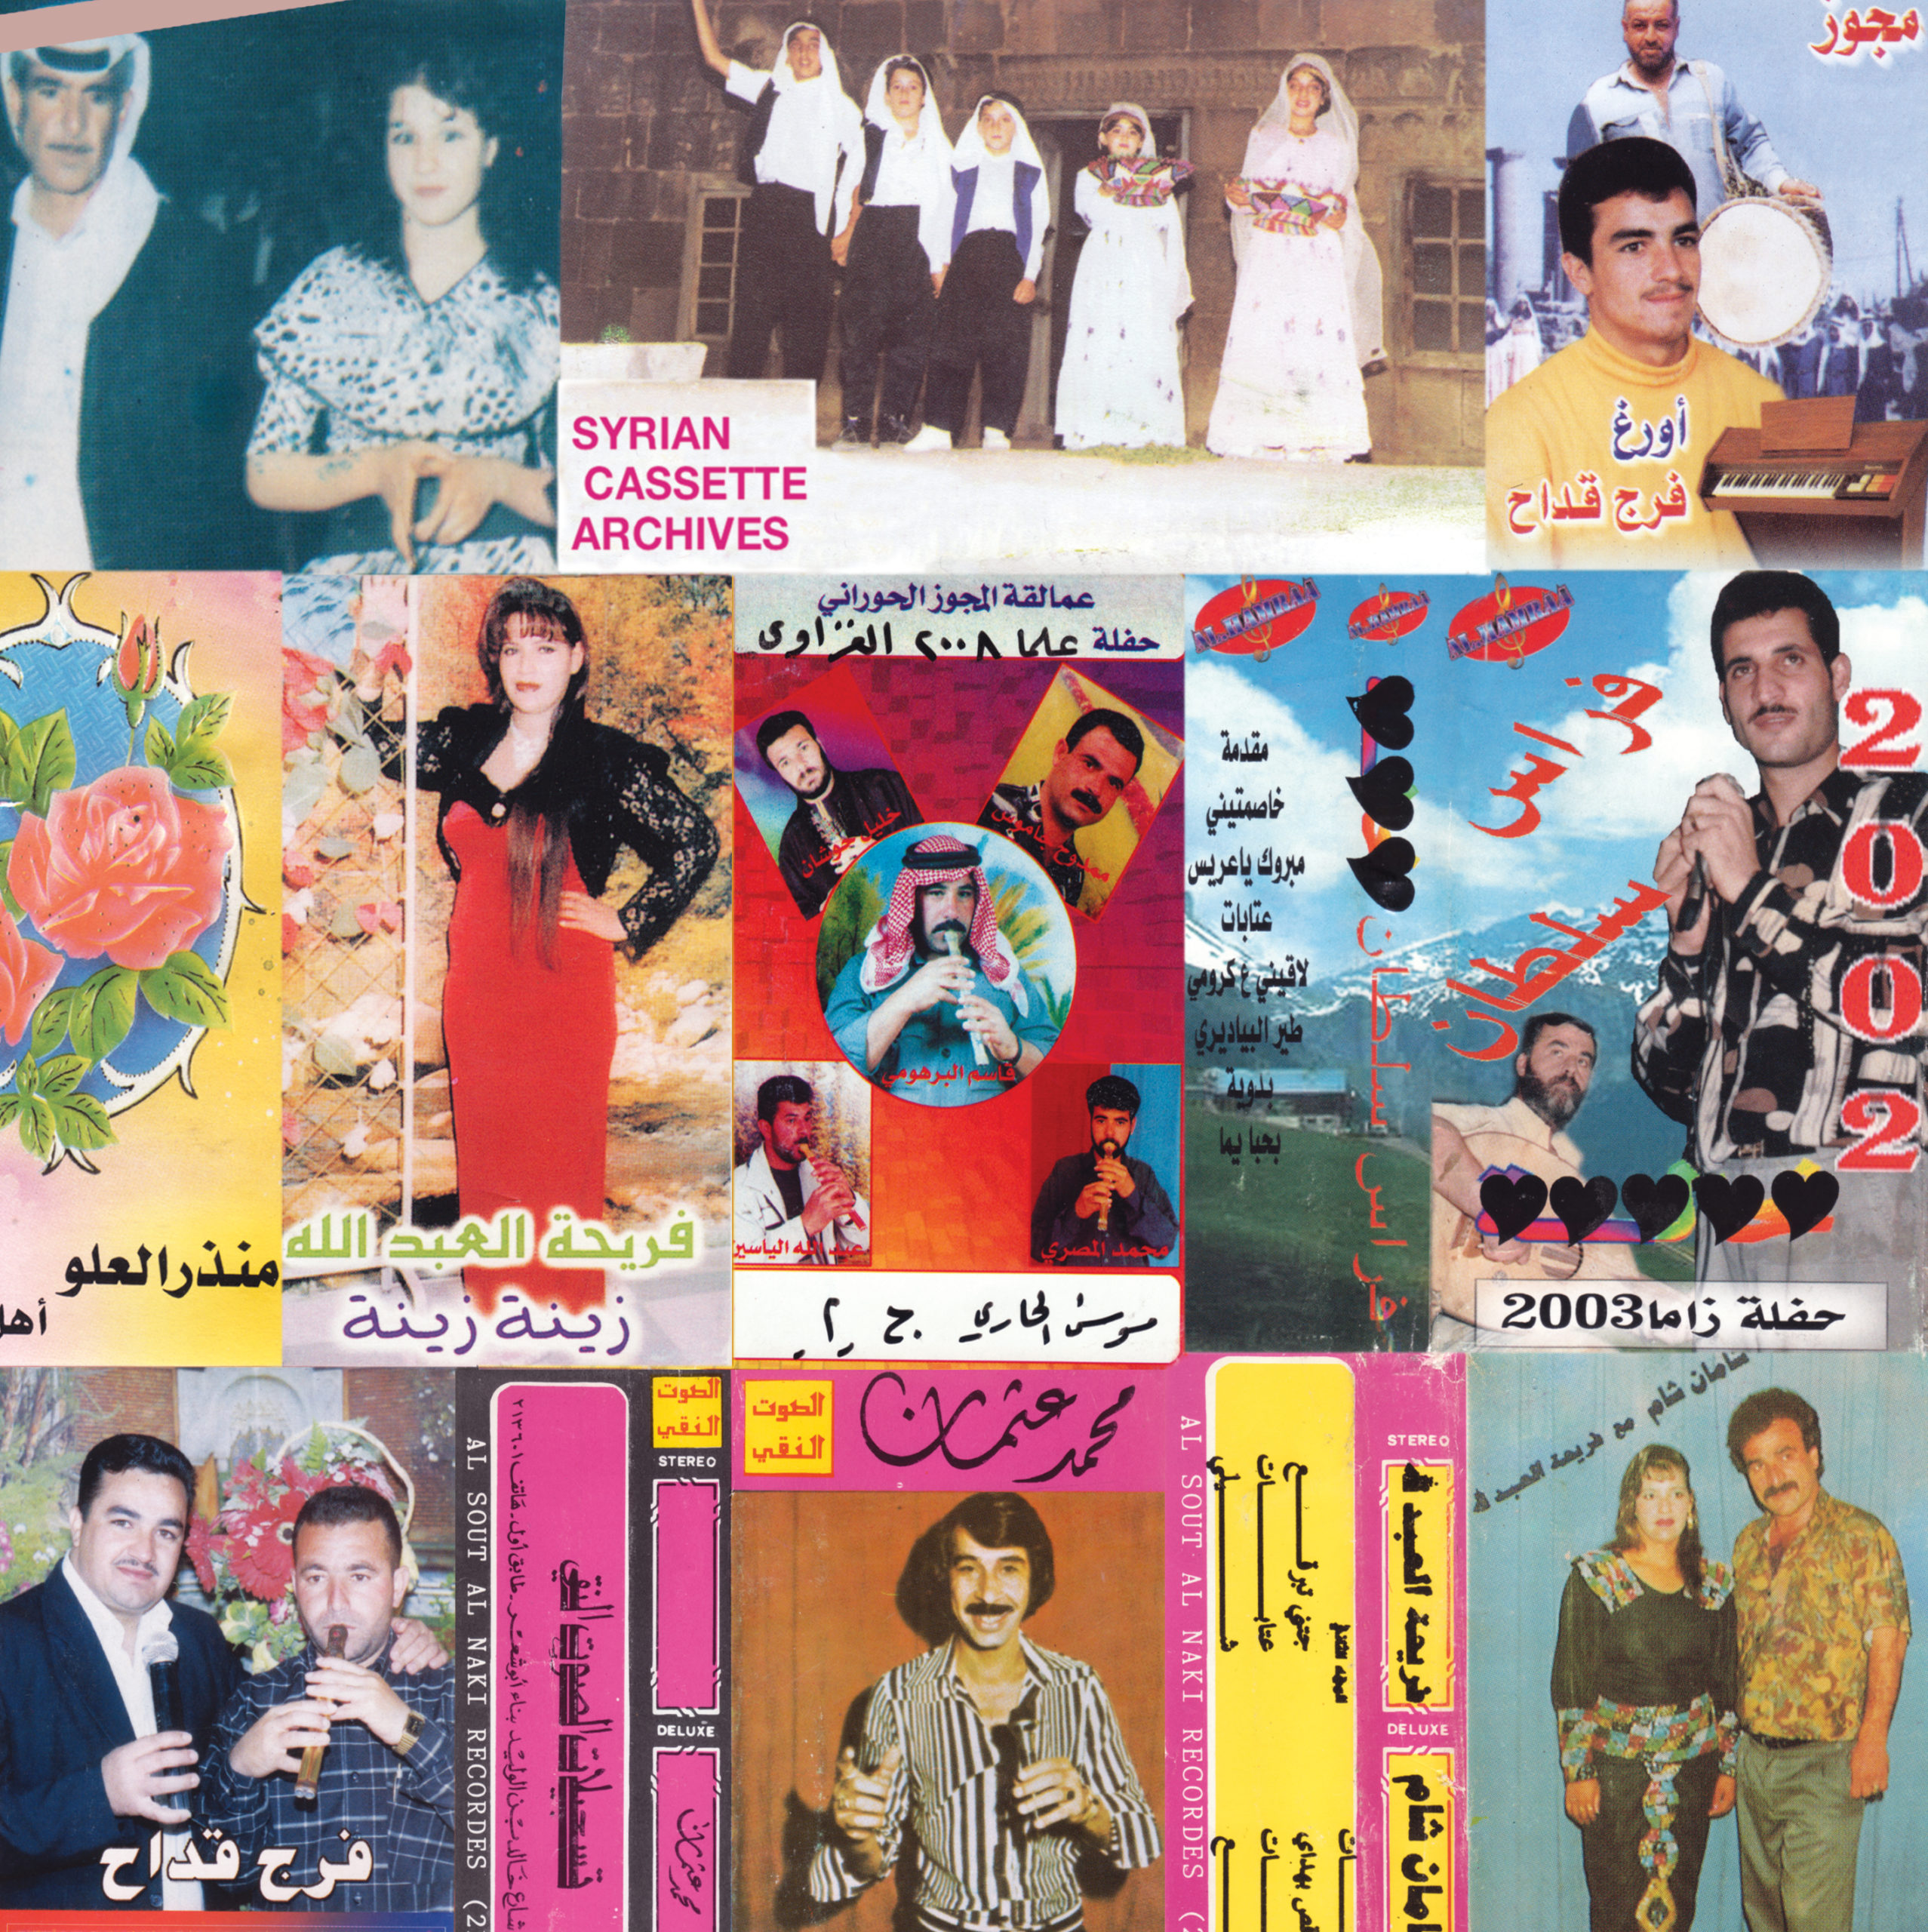 Vintage cassette tape covers showing Syrian singers and musicians.